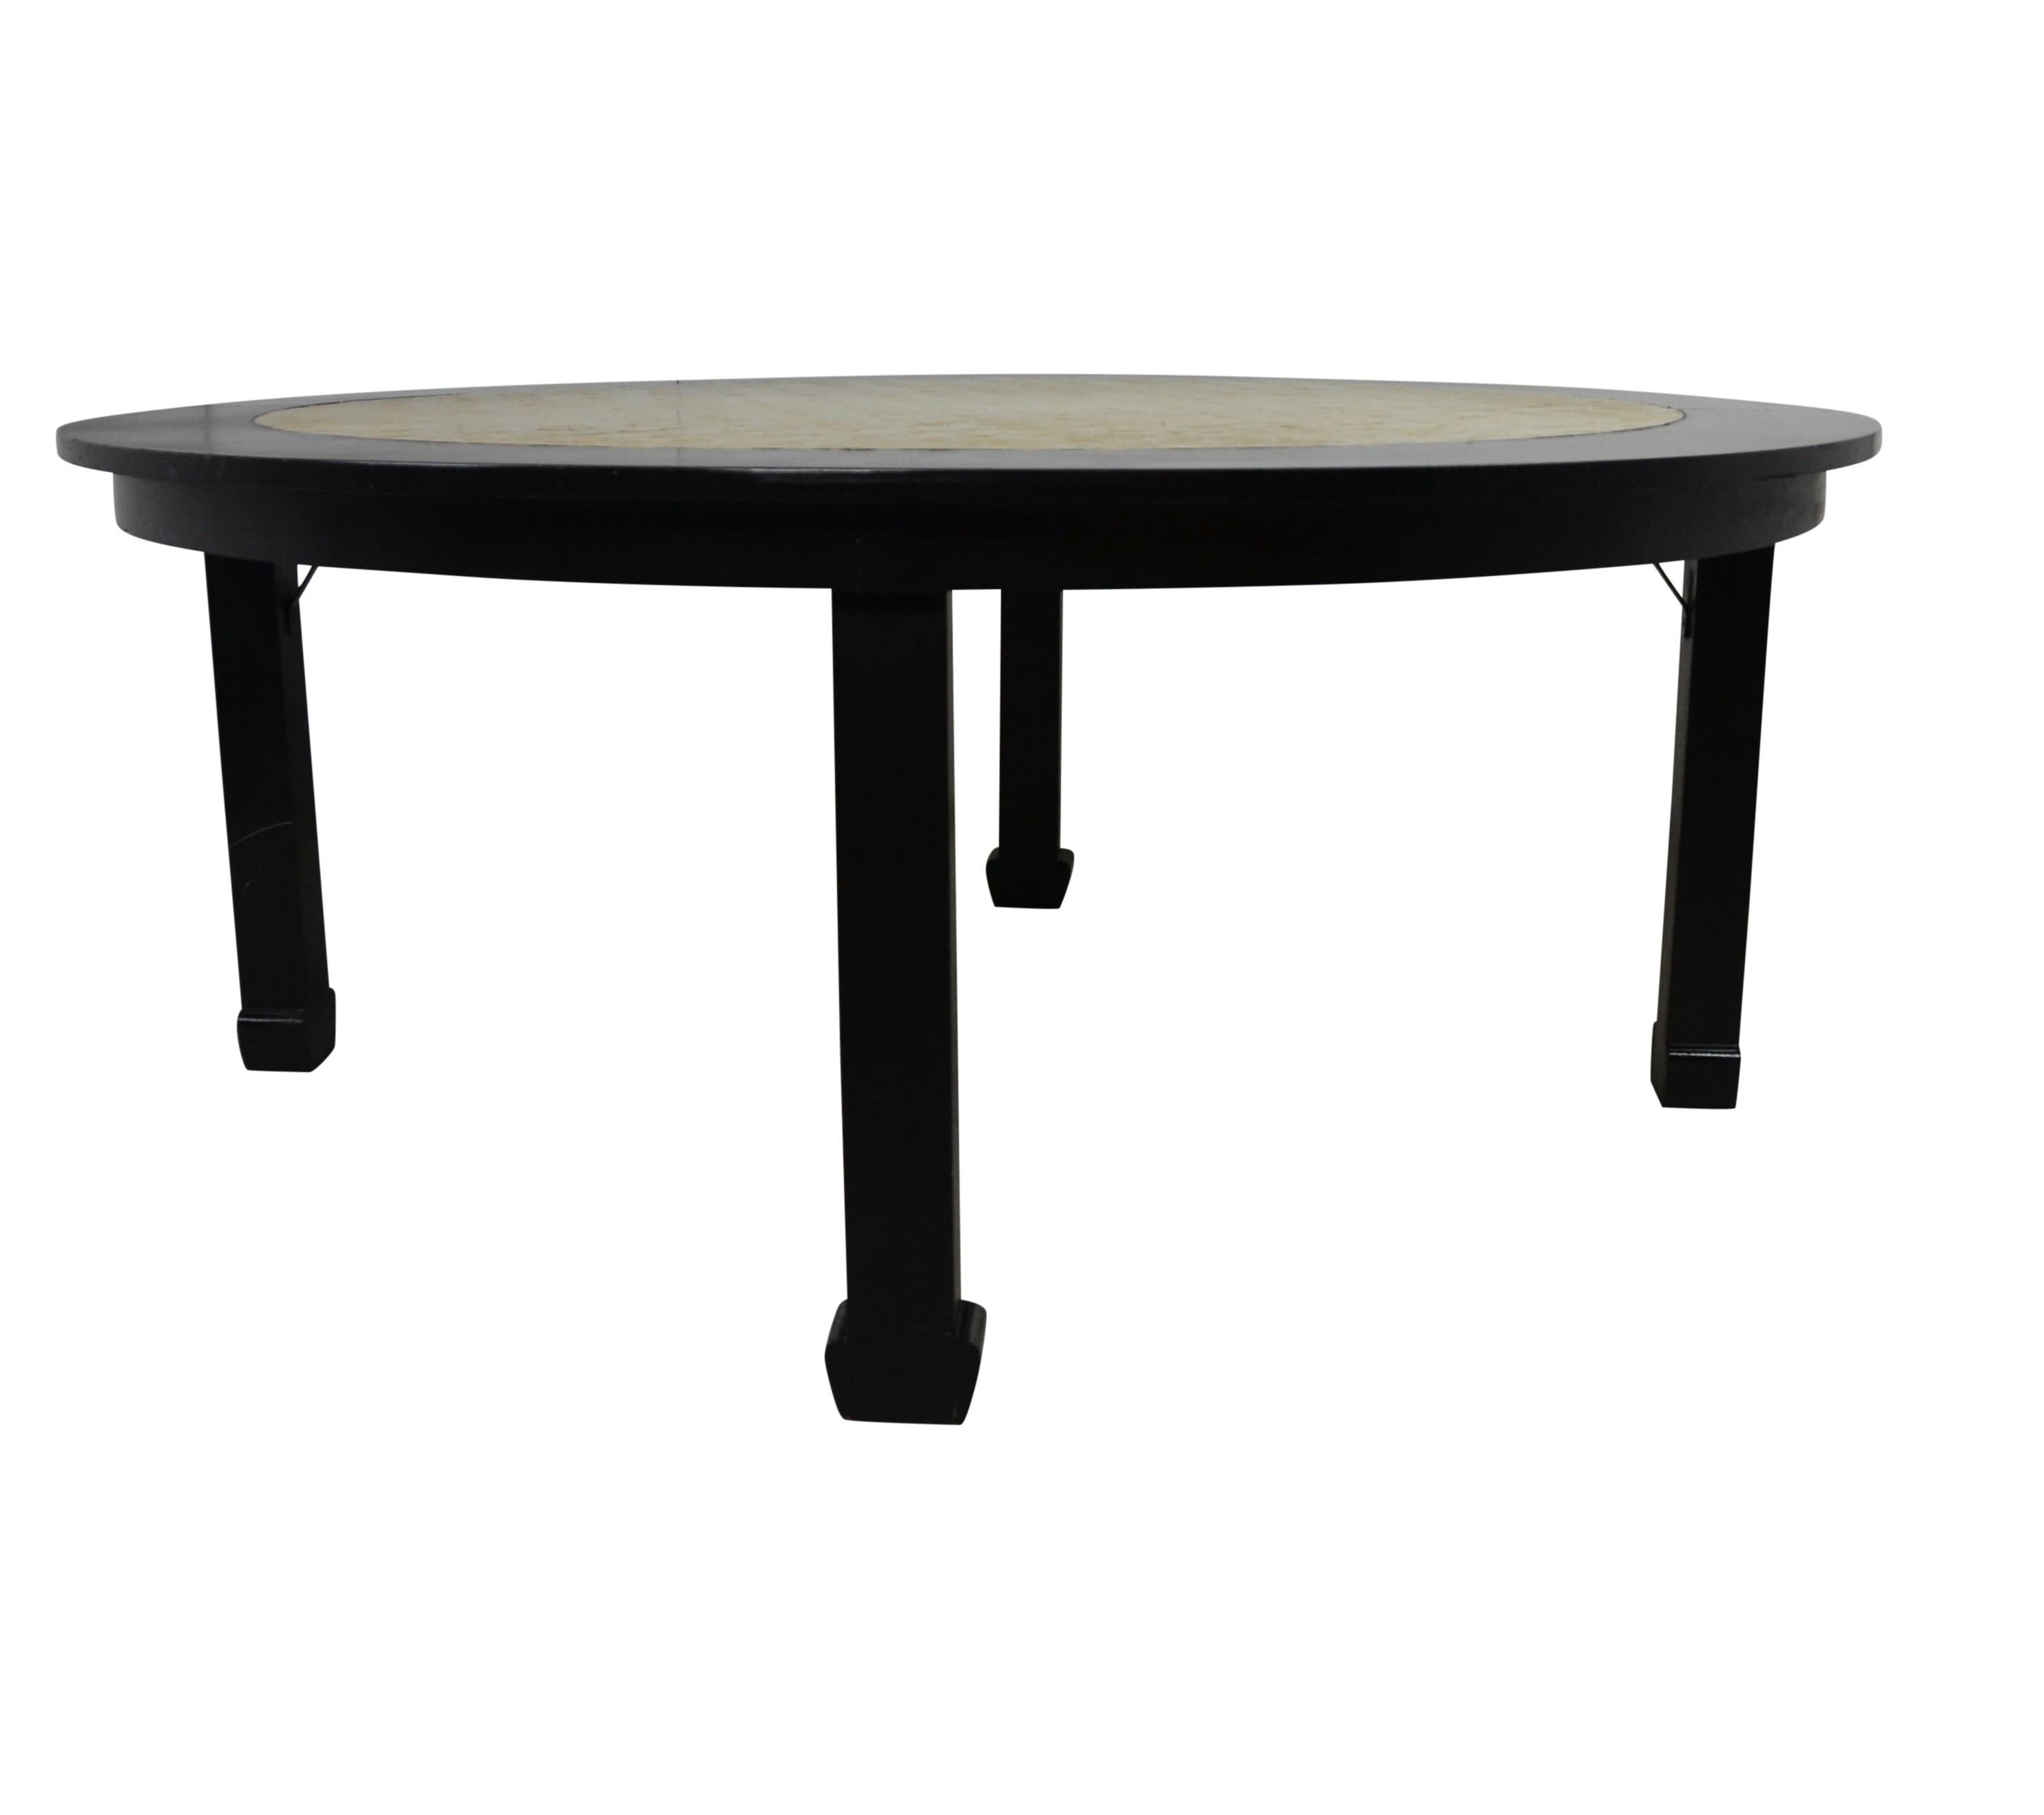 A lounge table and chairs. Finished in an ebony. Center of table is decorated in flat mother of pearl shell-work. Chairs are newly upholstered in linen and feature a brass moving handle to the top/back. Measures: Table 60